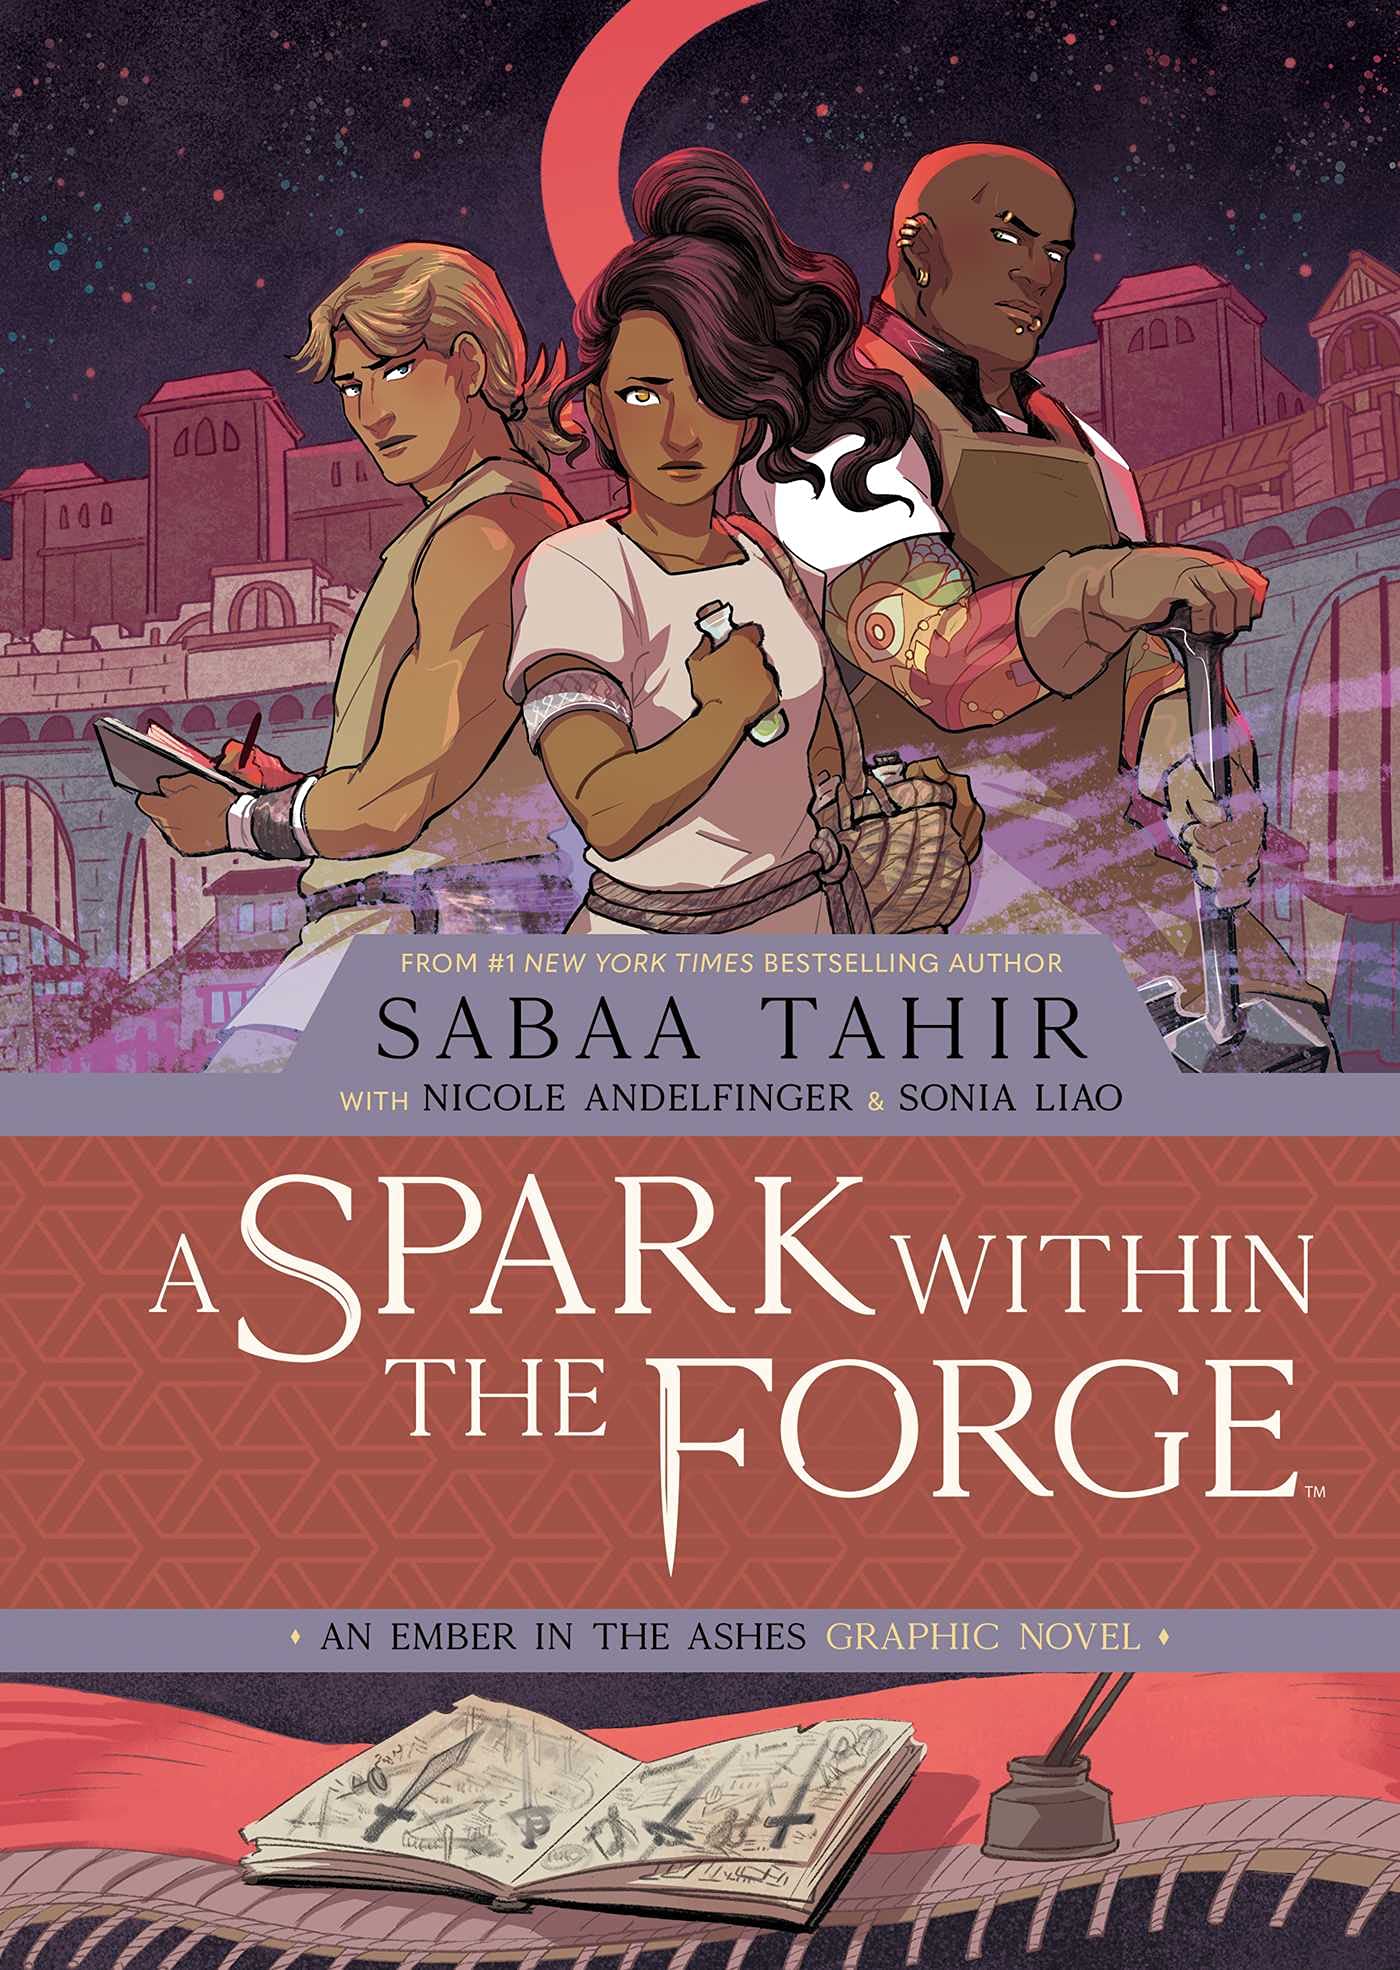 Cover of “A Spark Within the Forge” by Sabba Tahir